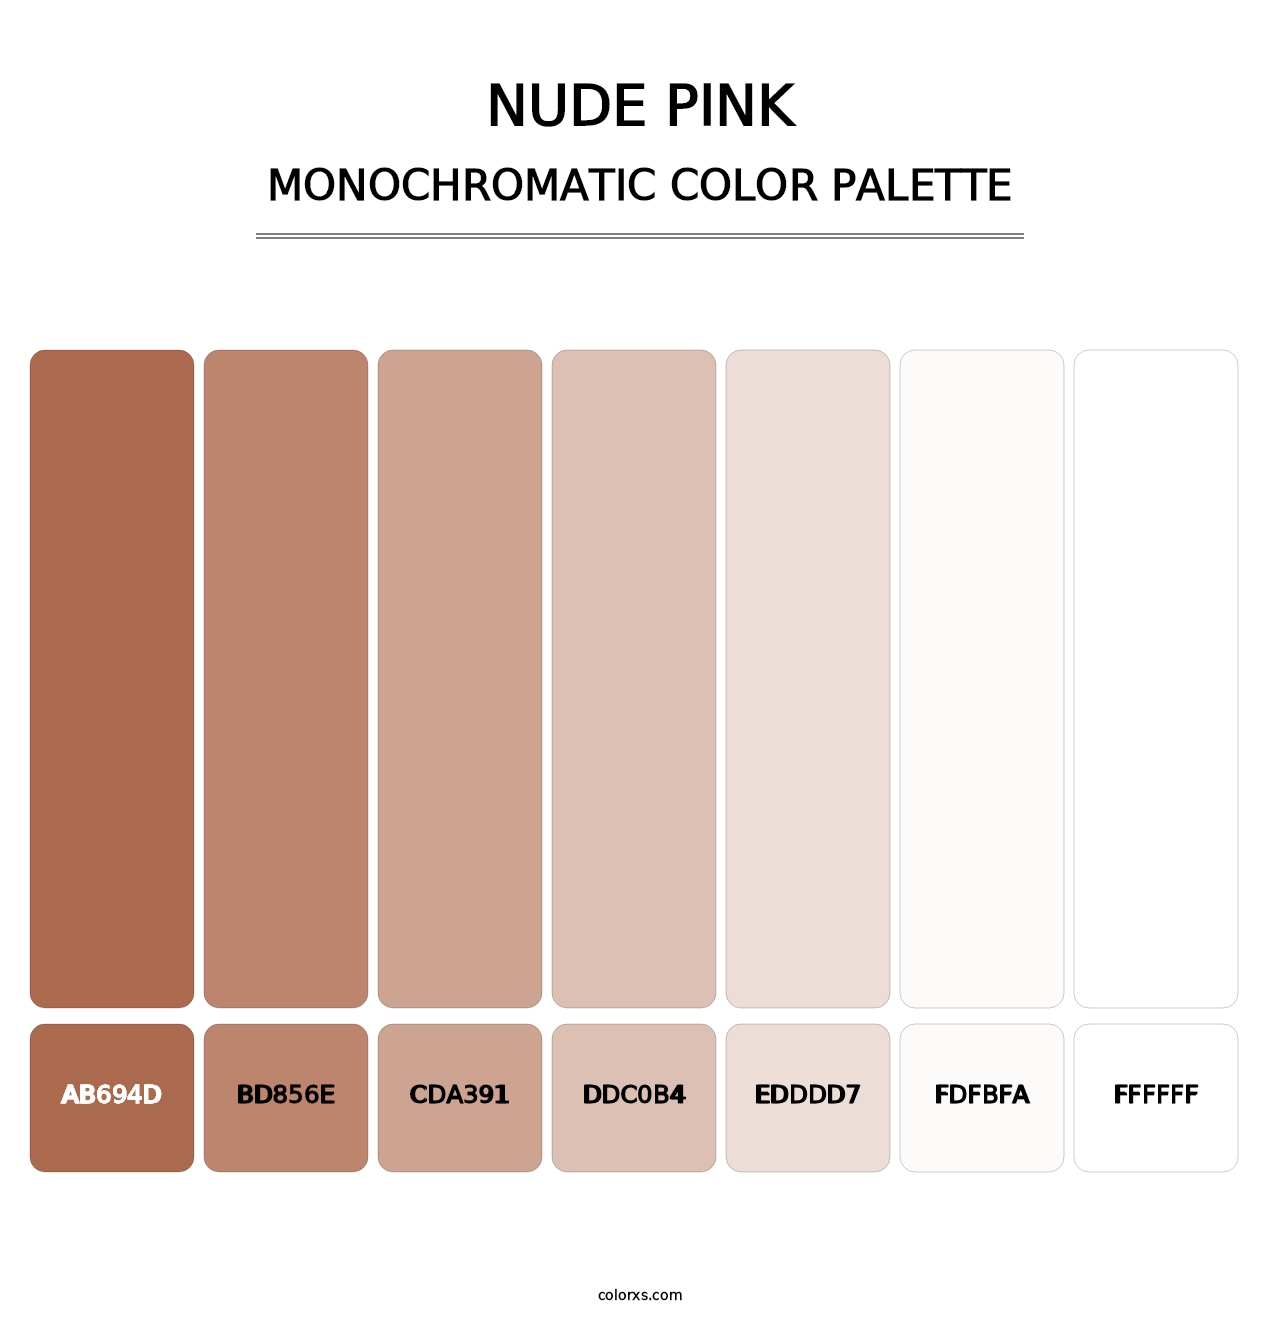 Nude Pink - Monochromatic Color Palette